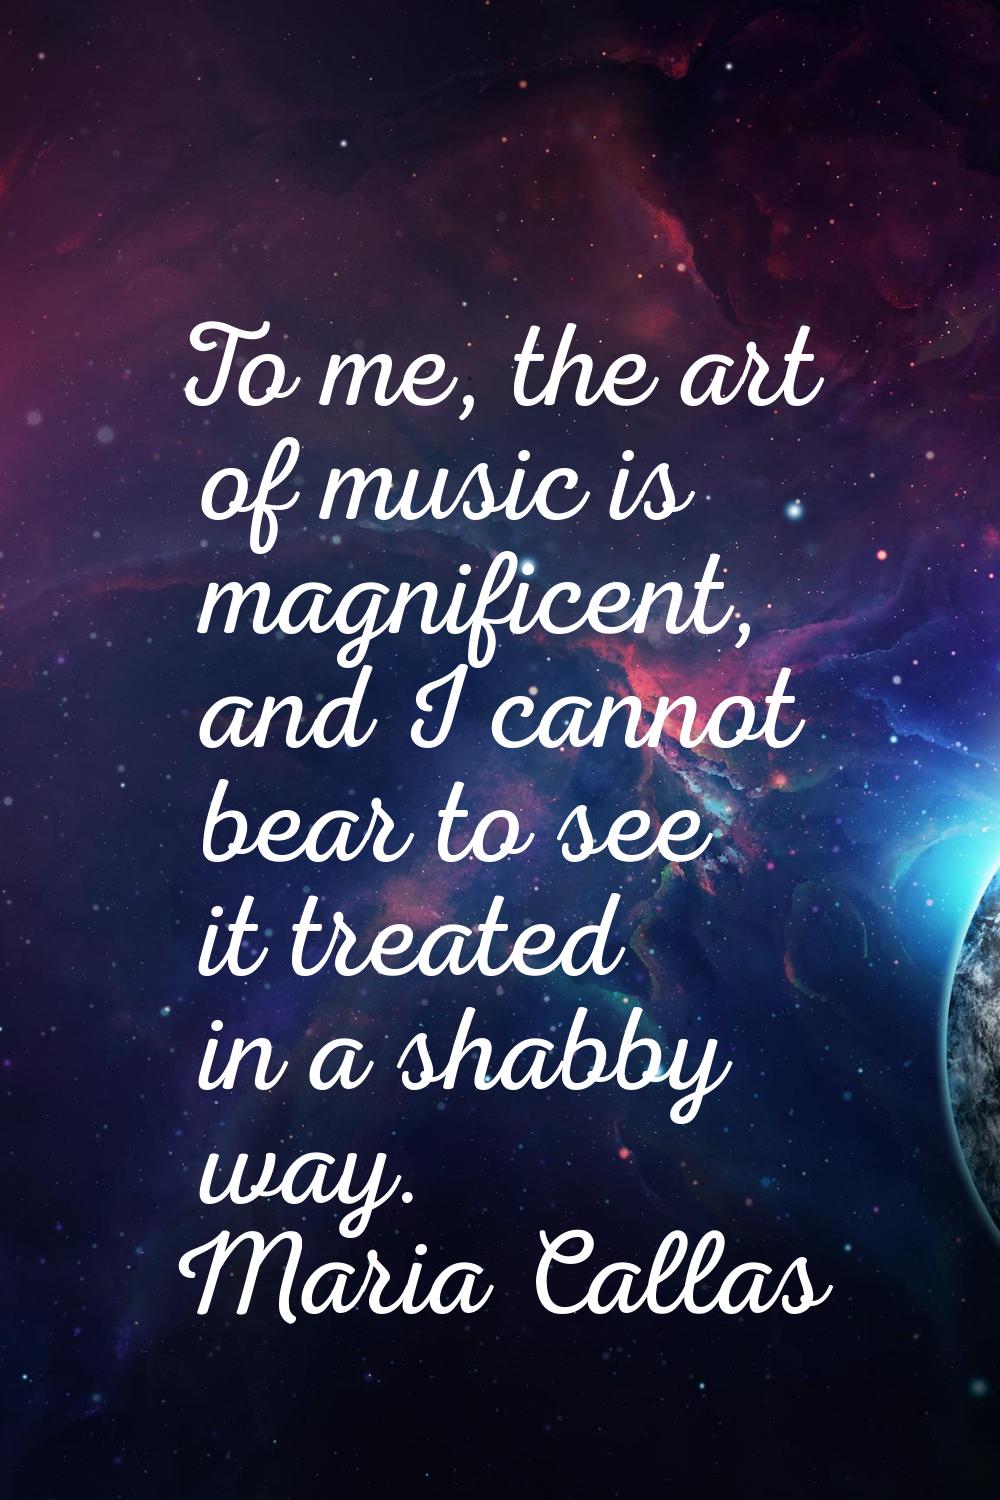 To me, the art of music is magnificent, and I cannot bear to see it treated in a shabby way.